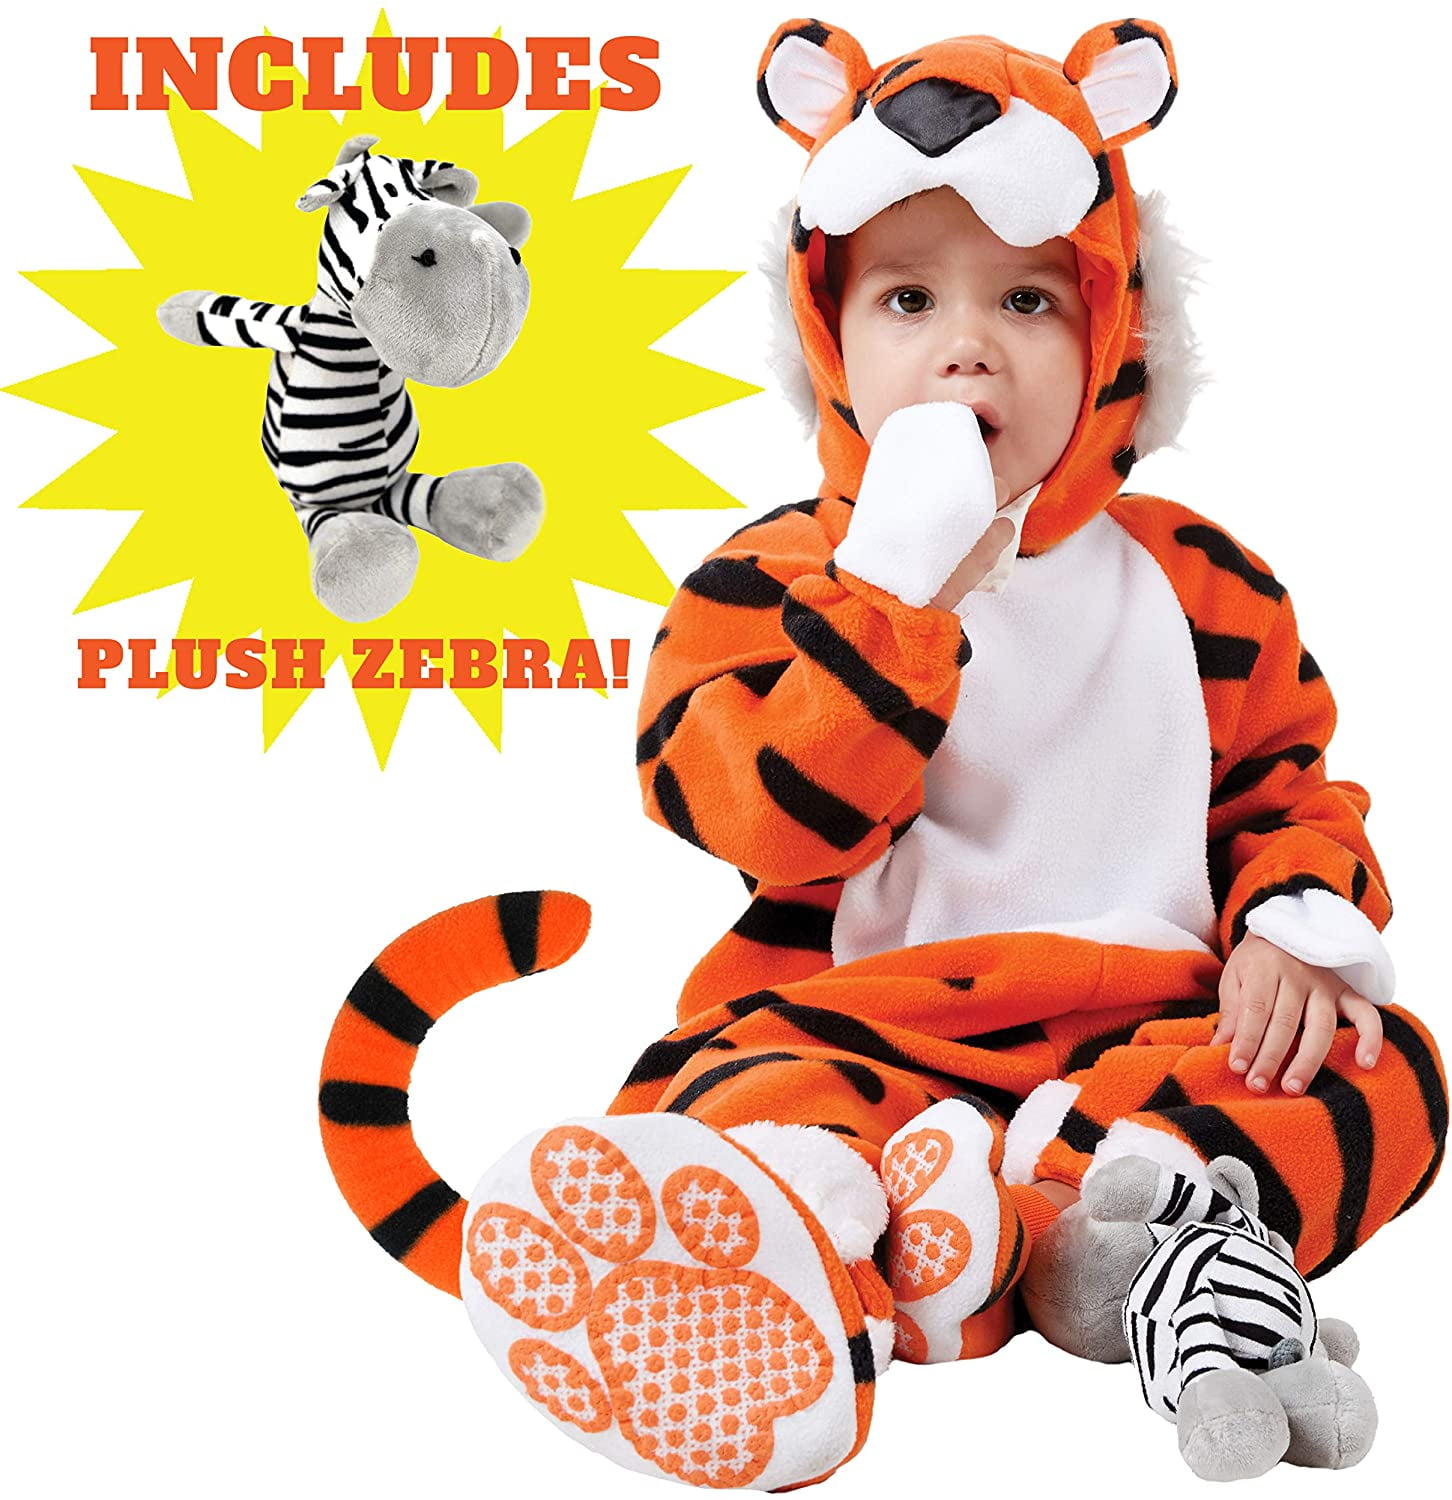 baby in tiger costume